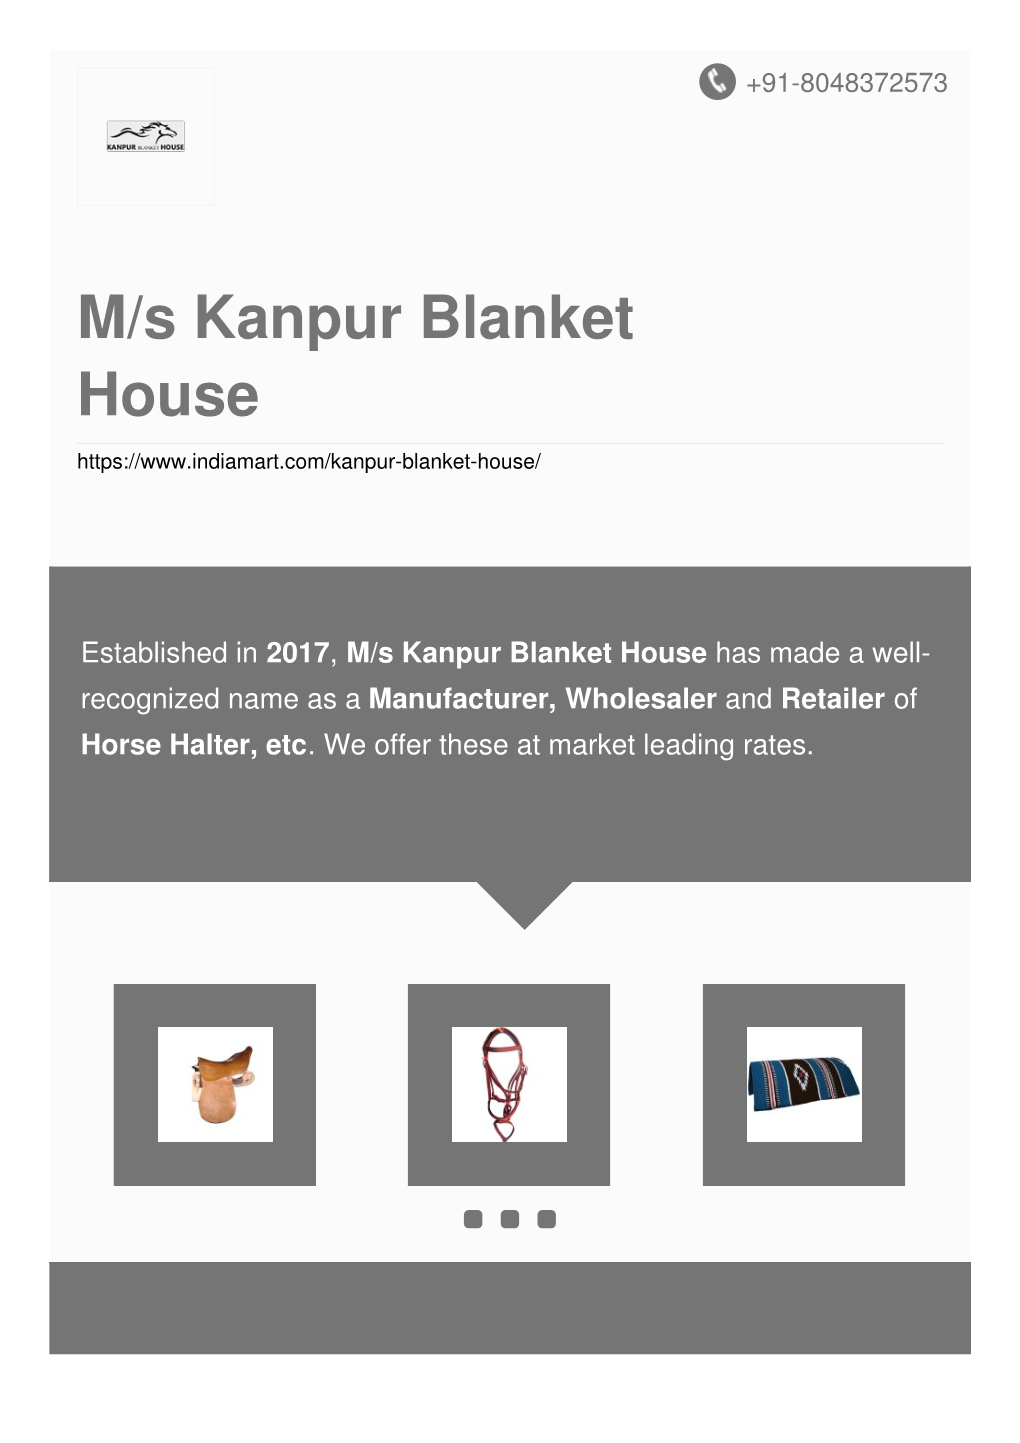 M/S Kanpur Blanket House